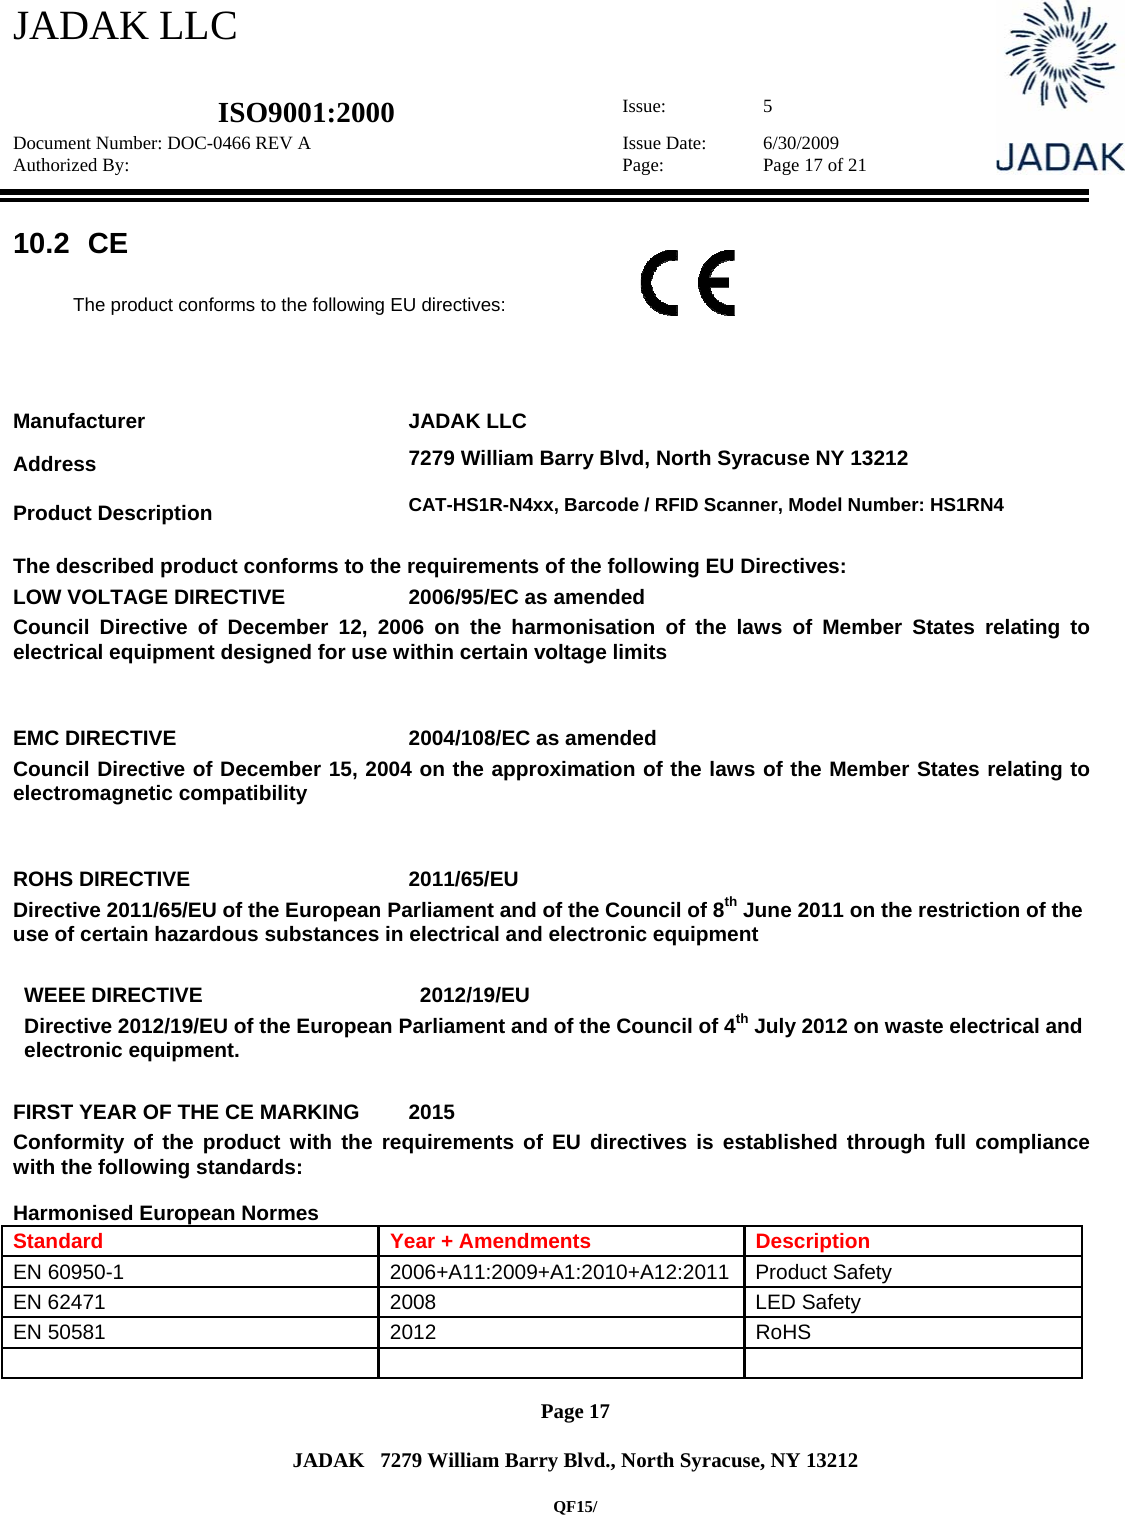 JADAK LLC   ISO9001:2000  Issue: 5 Document Number: DOC-0466 REV A  Issue Date:  6/30/2009 Authorized By:  Page:  Page 17 of 21       Page 17   JADAK   7279 William Barry Blvd., North Syracuse, NY 13212  QF15/ 10.2   CE  The product conforms to the following EU directives:     Manufacturer JADAK LLC Address   7279 William Barry Blvd, North Syracuse NY 13212  Product Description  CAT-HS1R-N4xx, Barcode / RFID Scanner, Model Number: HS1RN4 The described product conforms to the requirements of the following EU Directives: LOW VOLTAGE DIRECTIVE  2006/95/EC as amended Council Directive of December 12, 2006 on the harmonisation of the laws of Member States relating to electrical equipment designed for use within certain voltage limits  EMC DIRECTIVE  2004/108/EC as amended Council Directive of December 15, 2004 on the approximation of the laws of the Member States relating to electromagnetic compatibility  ROHS DIRECTIVE  2011/65/EU Directive 2011/65/EU of the European Parliament and of the Council of 8th June 2011 on the restriction of the use of certain hazardous substances in electrical and electronic equipment  WEEE DIRECTIVE  2012/19/EU Directive 2012/19/EU of the European Parliament and of the Council of 4th July 2012 on waste electrical and electronic equipment.   FIRST YEAR OF THE CE MARKING  2015 Conformity of the product with the requirements of EU directives is established through full compliance with the following standards:  Harmonised European Normes Standard  Year + Amendments  Description EN 60950-1  2006+A11:2009+A1:2010+A12:2011  Product Safety EN 62471  2008  LED Safety EN 50581  2012  RoHS    